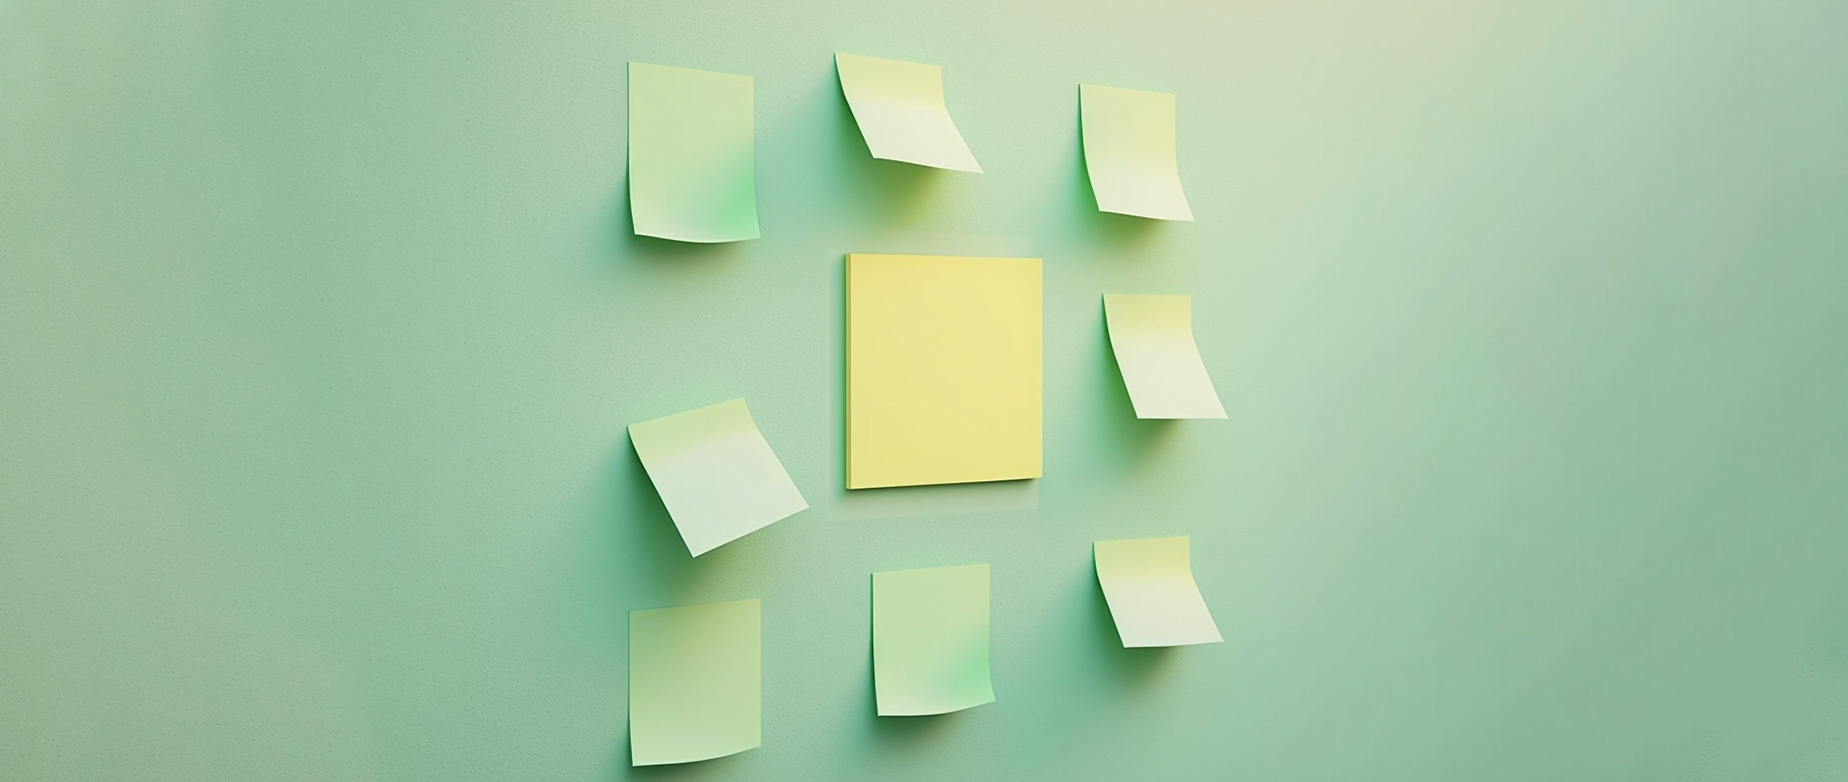 sticky notes on a wall in a kanban board formation